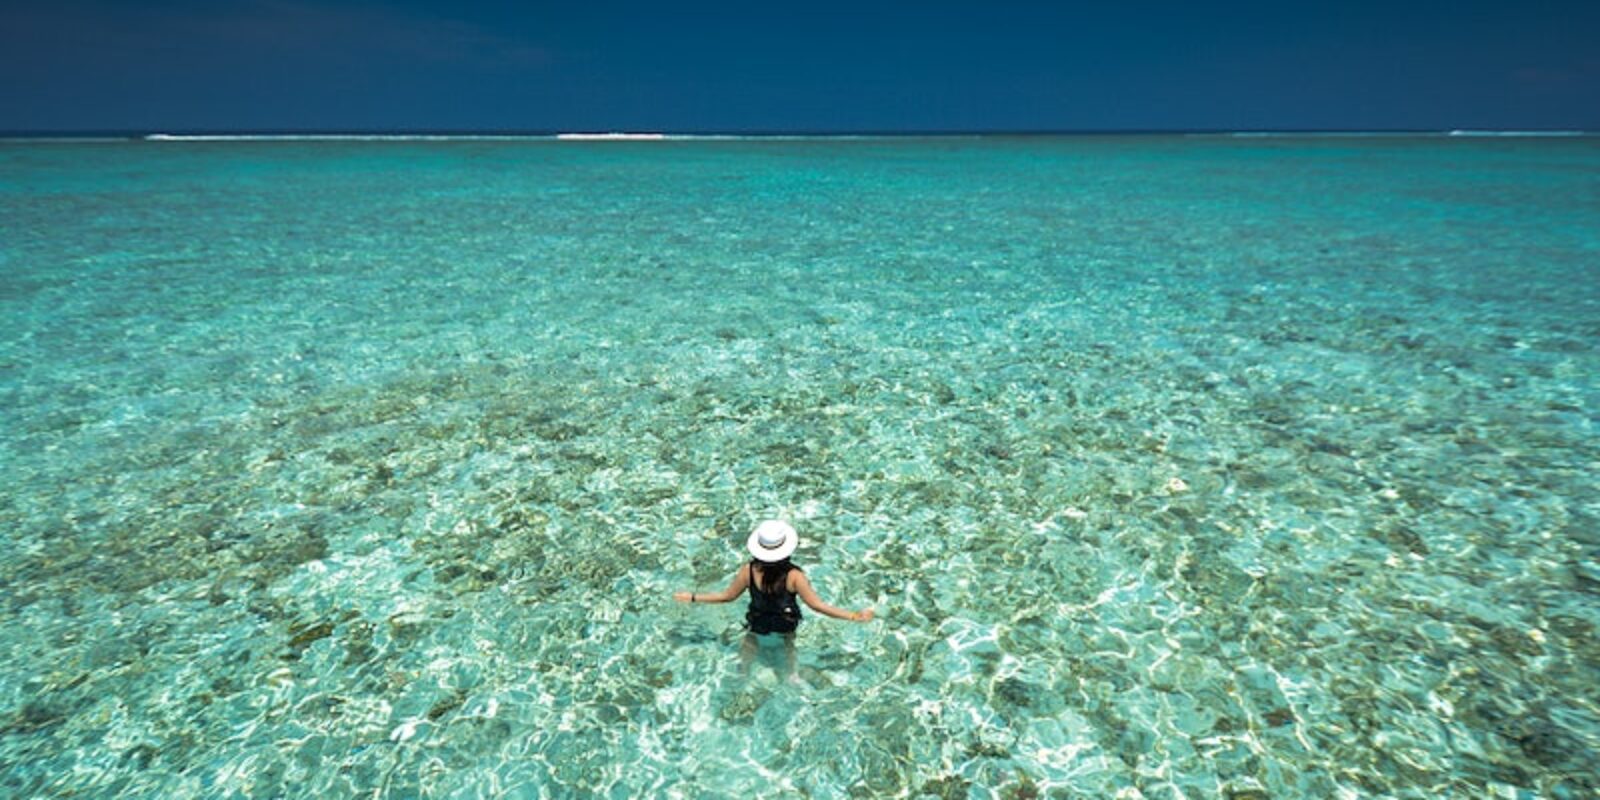 An image of a tourist swimming the waters of Belize.